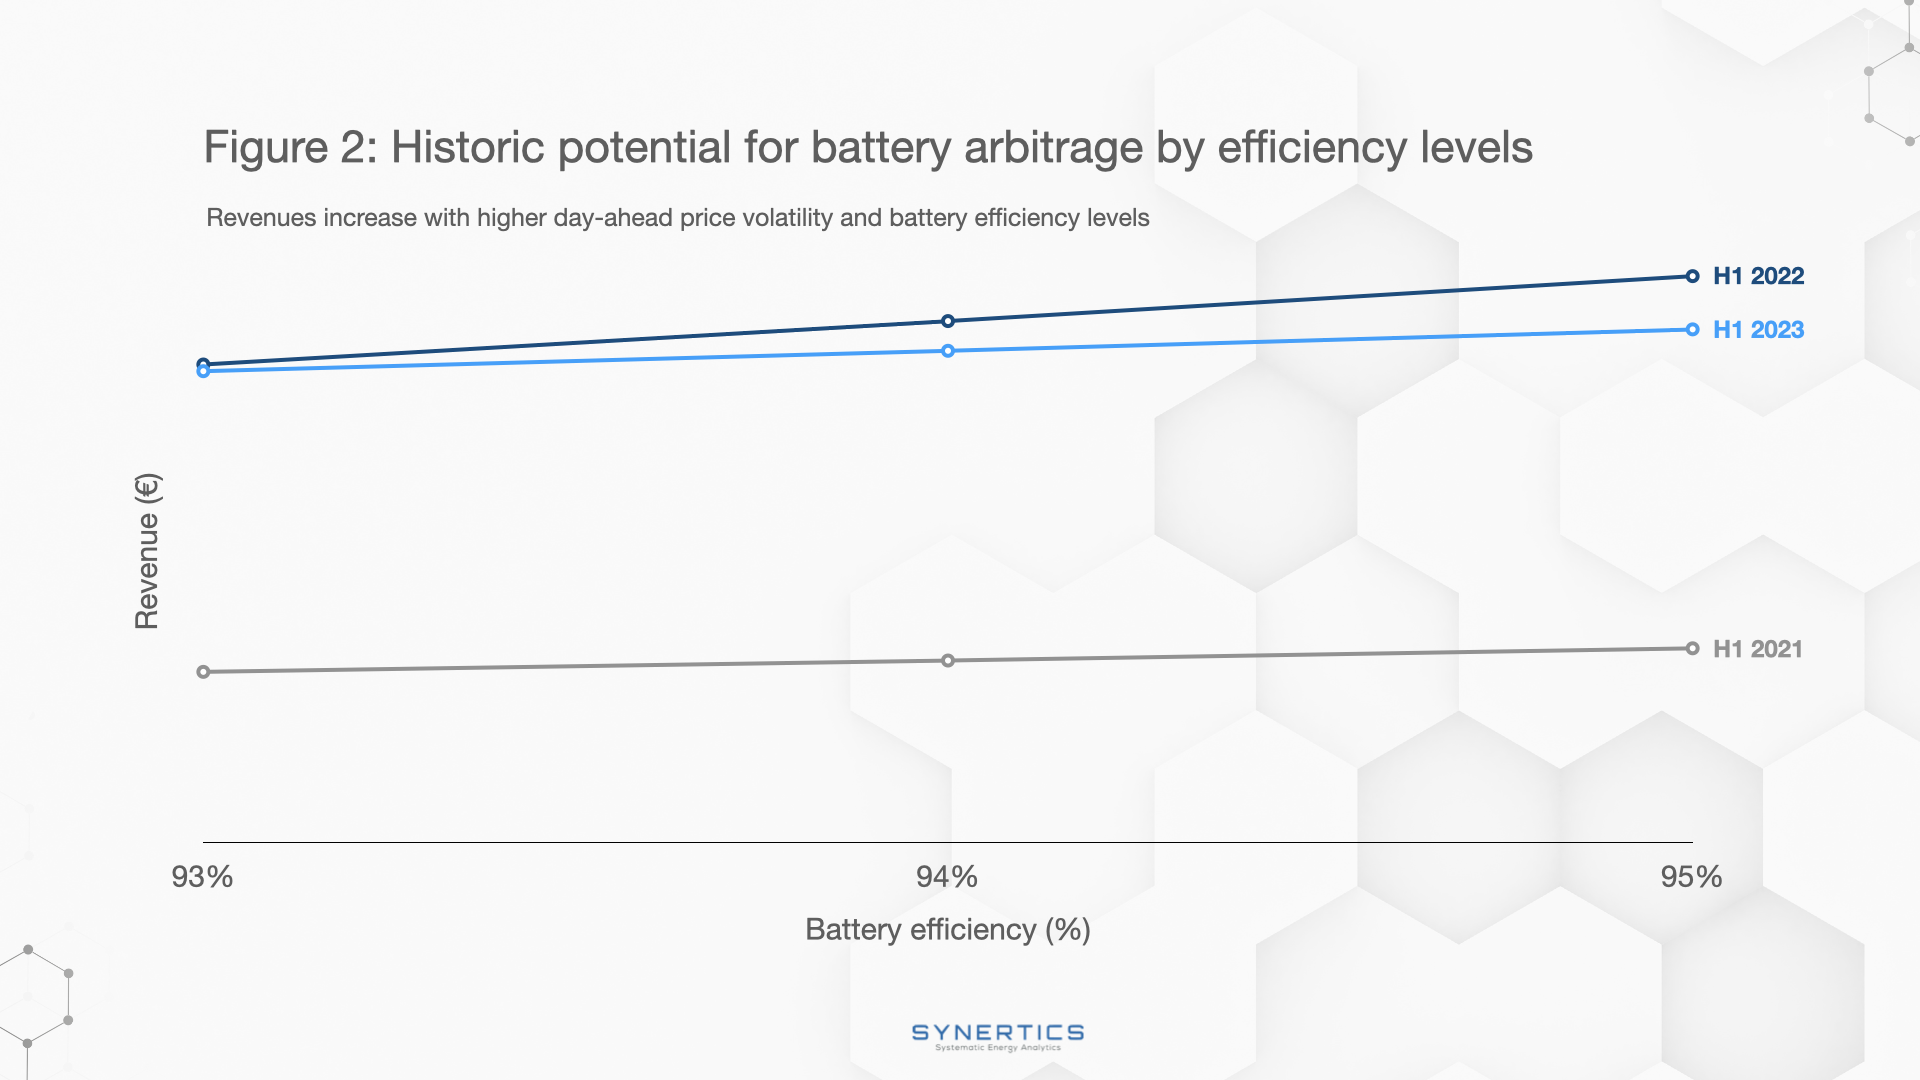 Why battery efficiency matters for maximising revenue streams